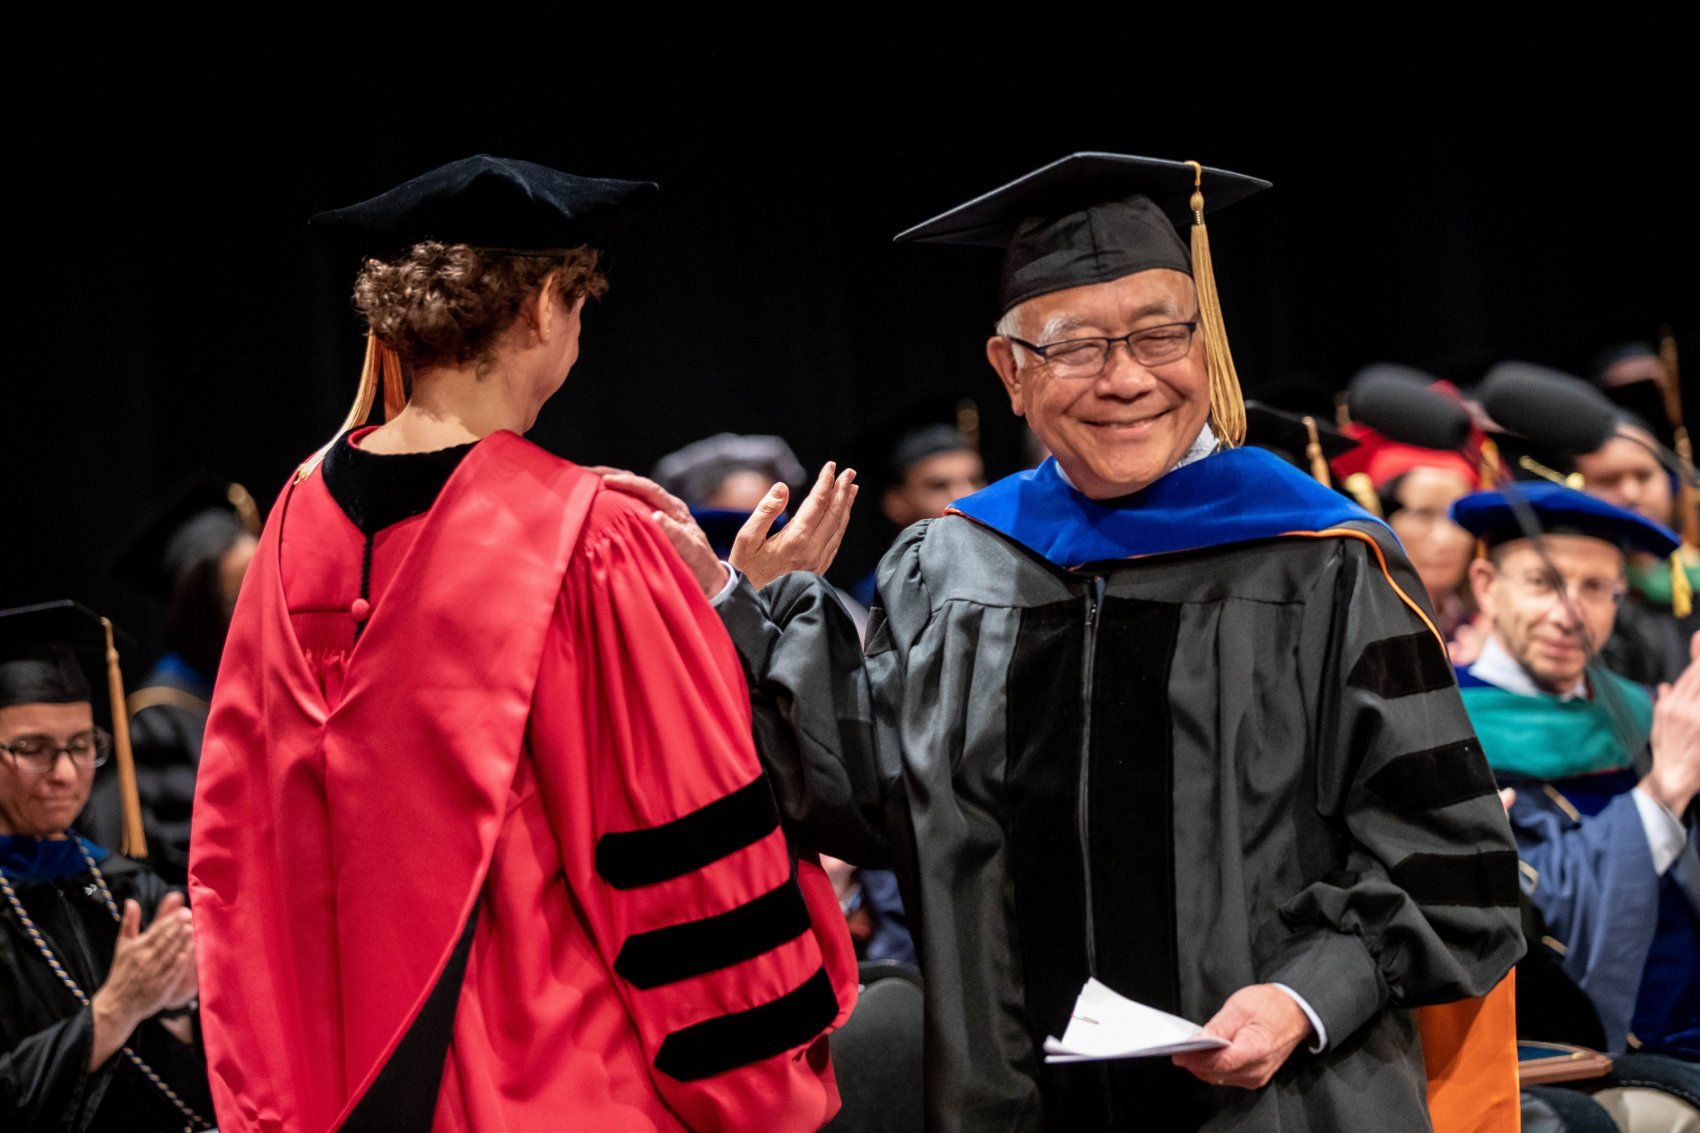 Keith Yamamoto greets Liz Watkins on stage at Grad Div Commencement 2019